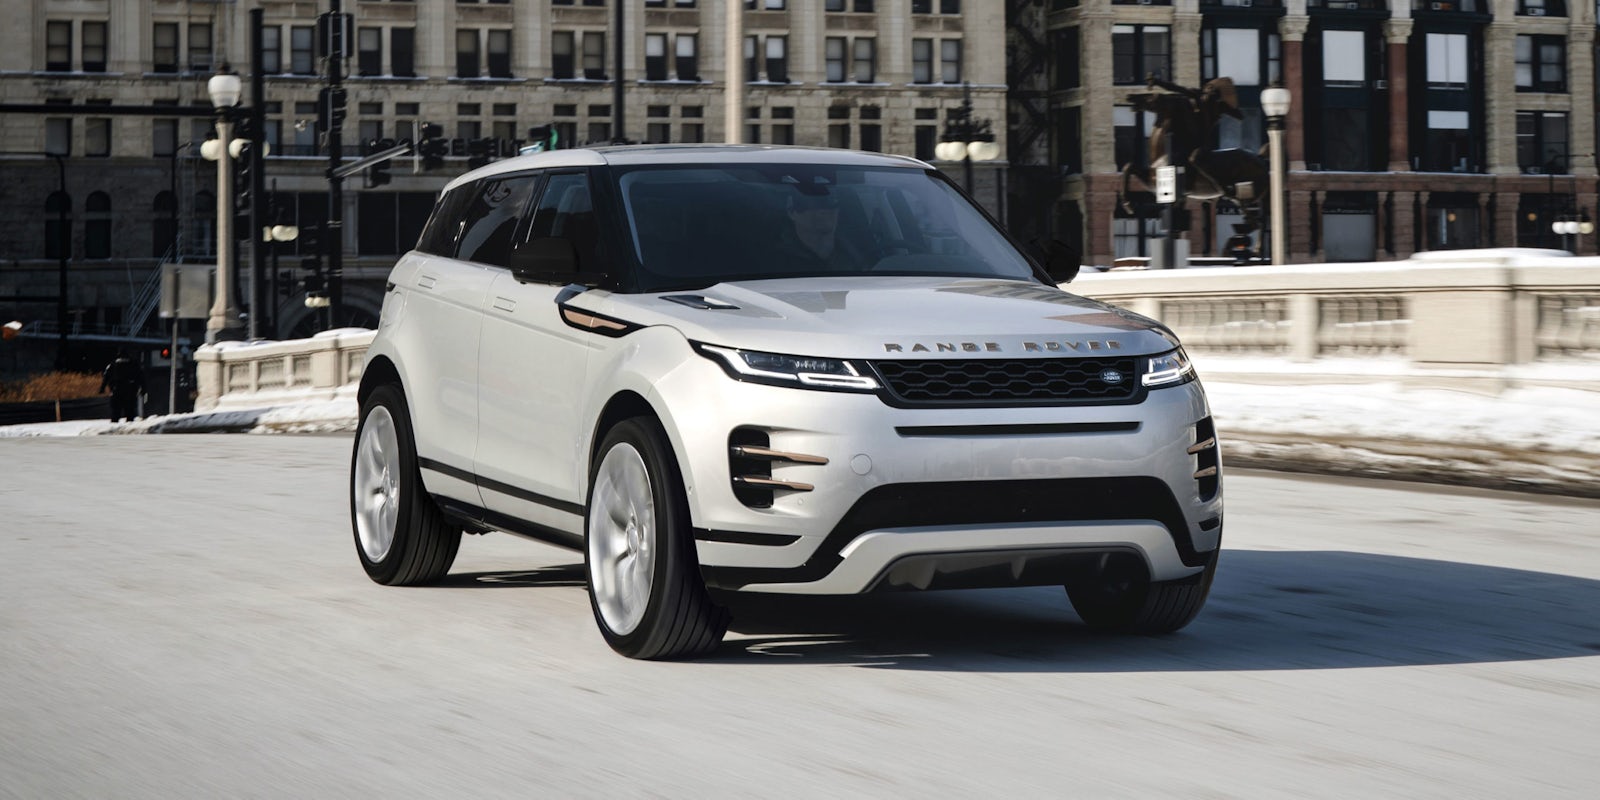 2021 Range Rover Evoque Updates Revealed Price Specs And Release Date Carwow